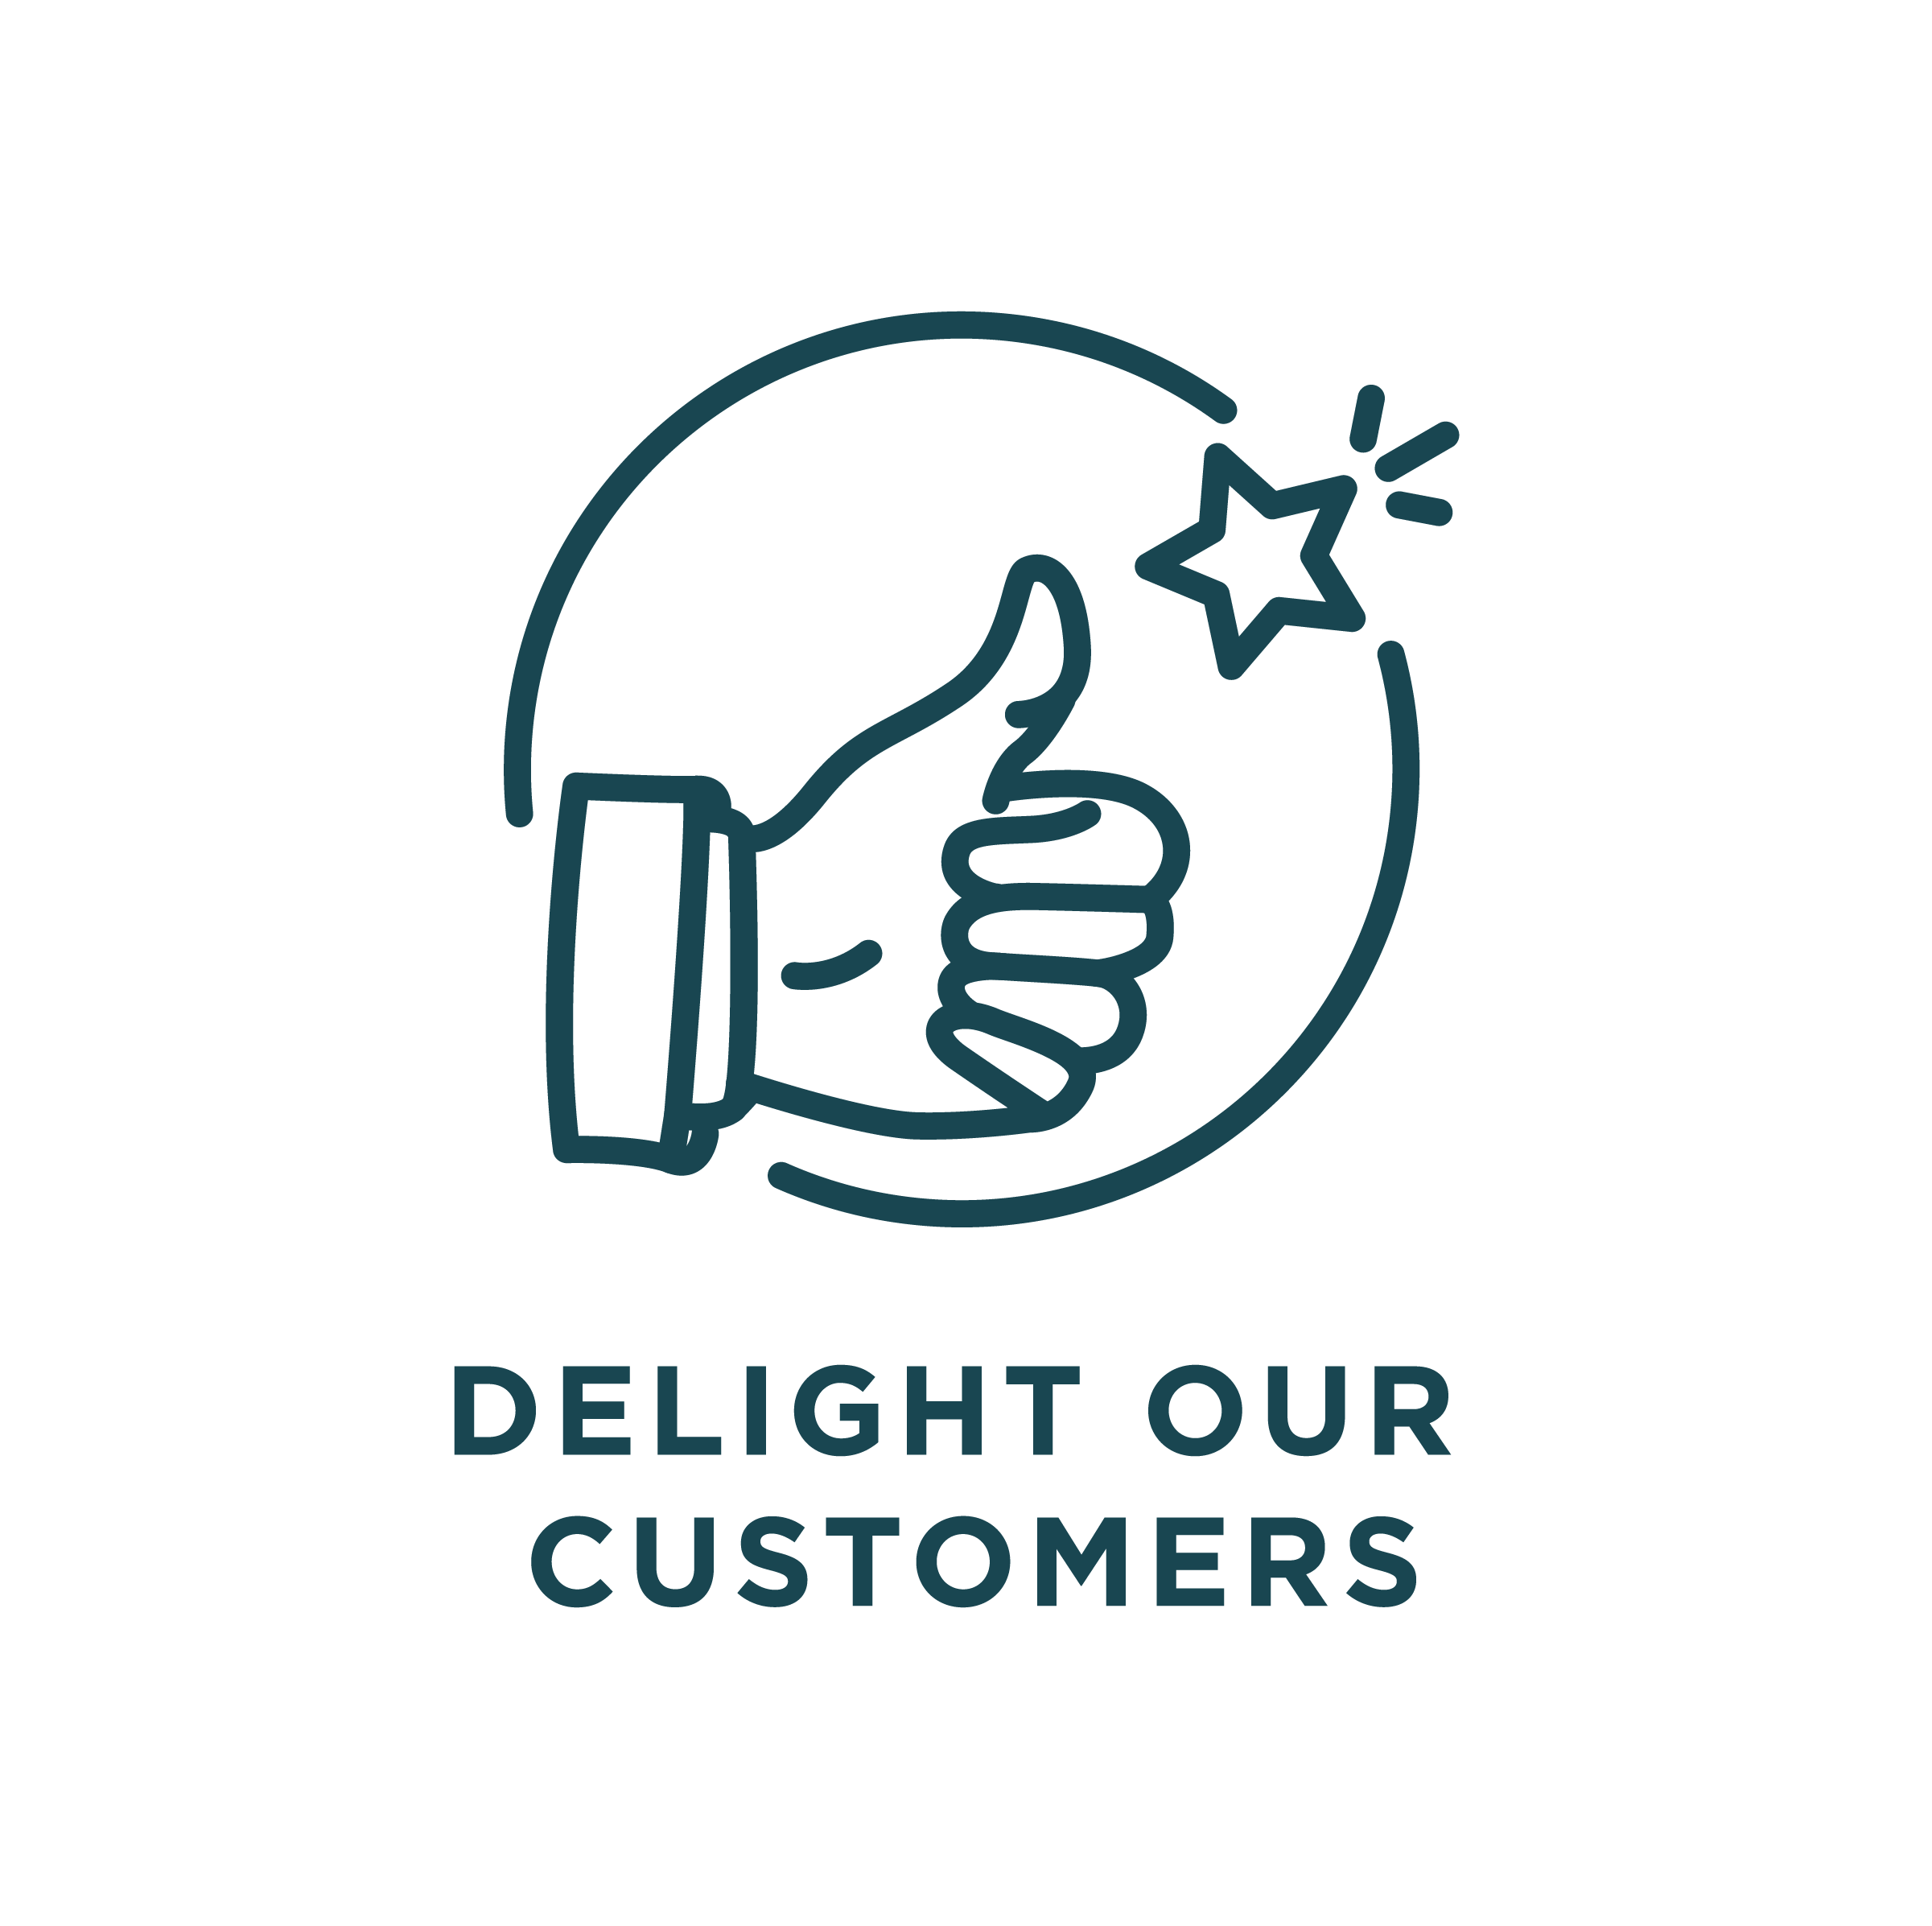 Delight our customers logo